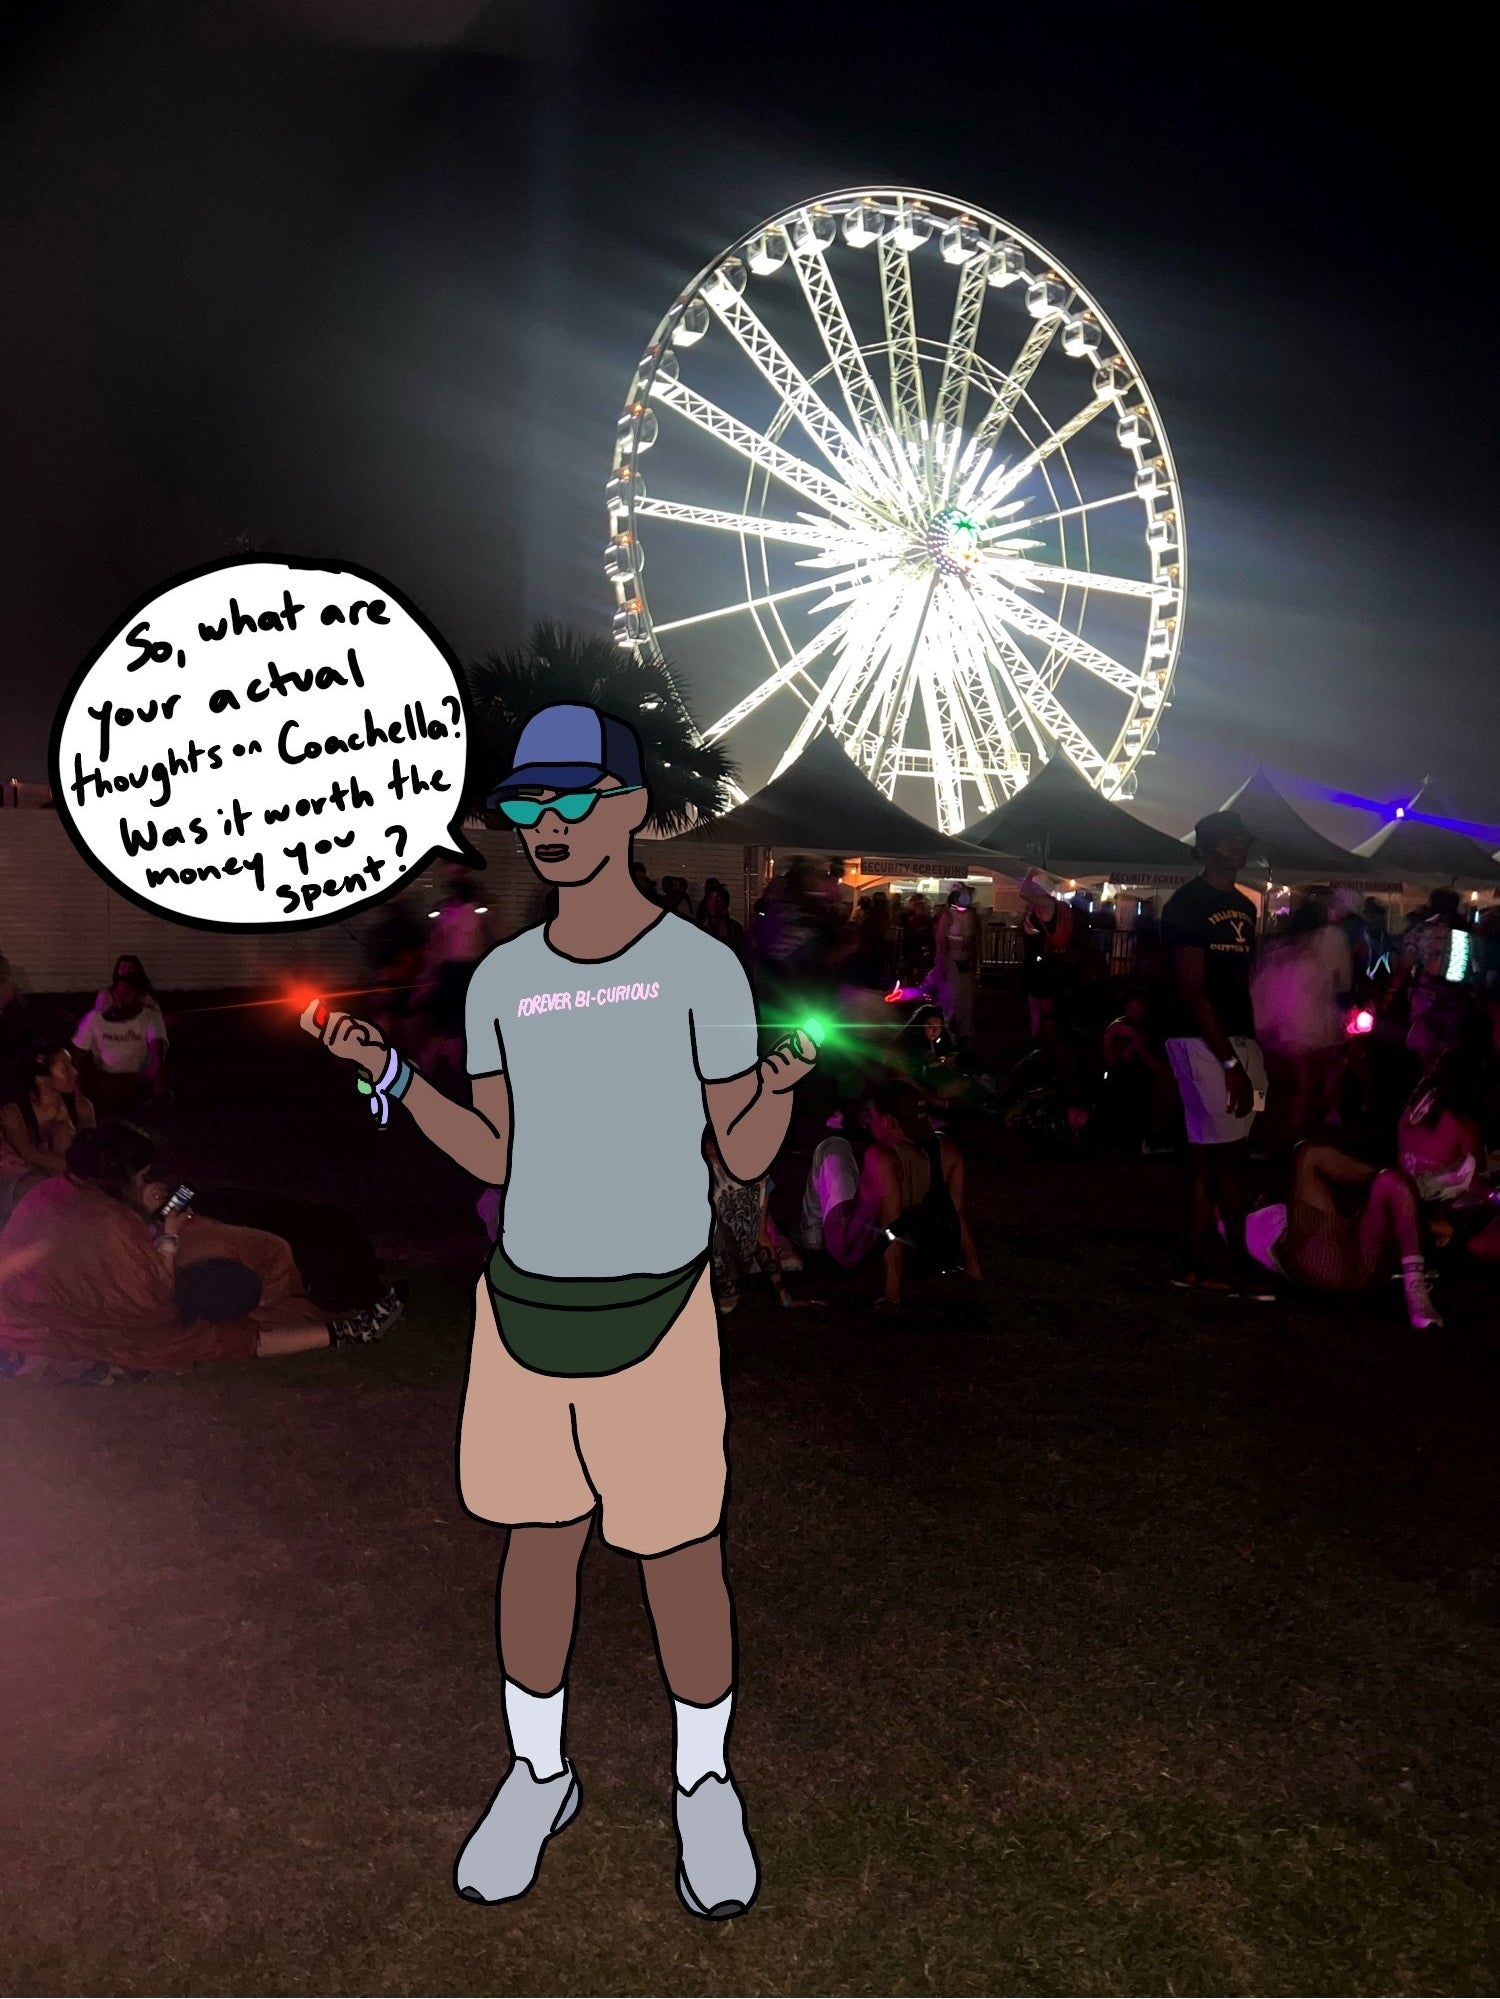 Pernell, the author, illustrated in front of the famous Coachella ferris wheel with a speech bubble saying &quot;So, what are your actual thoughts on Coachella? Was it worth the money you spent?&quot;